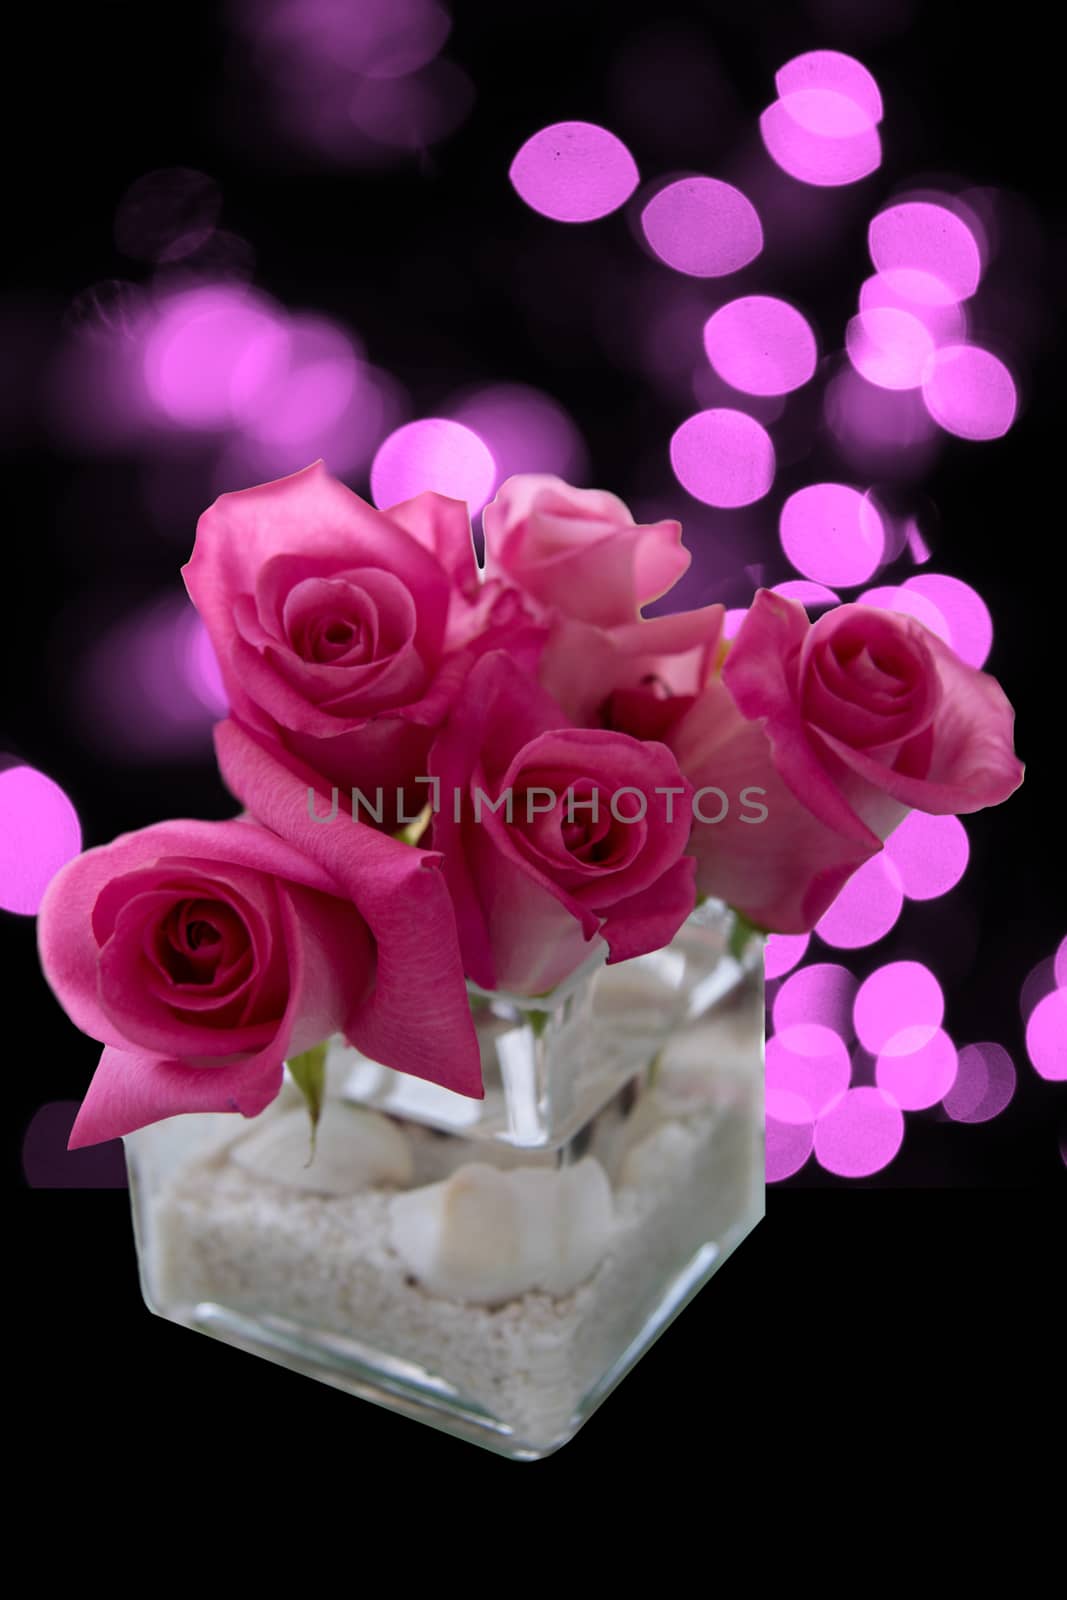 pink roses flower arrangement in vase with abstract pink lights in background